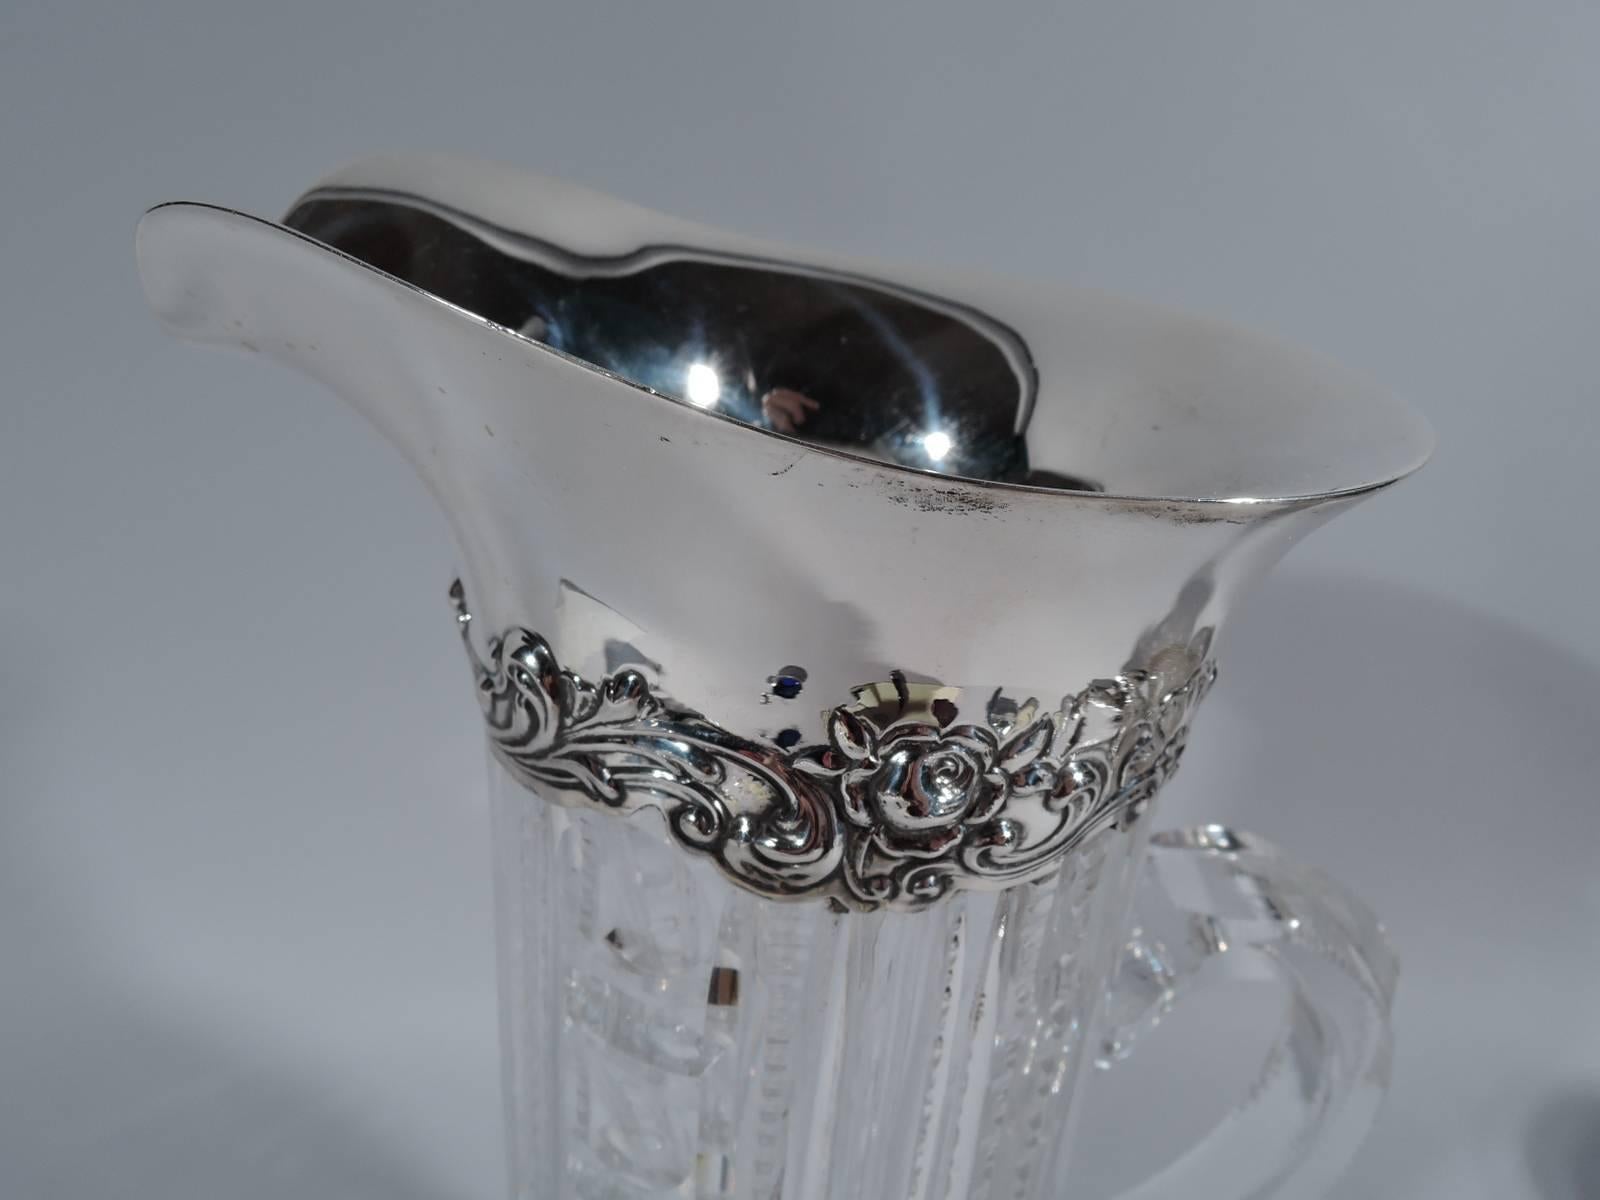 Lovely cut-glass claret jug with sterling silver collar. Made by Gorham in Providence, ca 1910. Cylindrical with C-scroll handle and spread base. Vertical ornament, including flutes, notches, and abstract egg and dart. Collar has helmet mouth and is